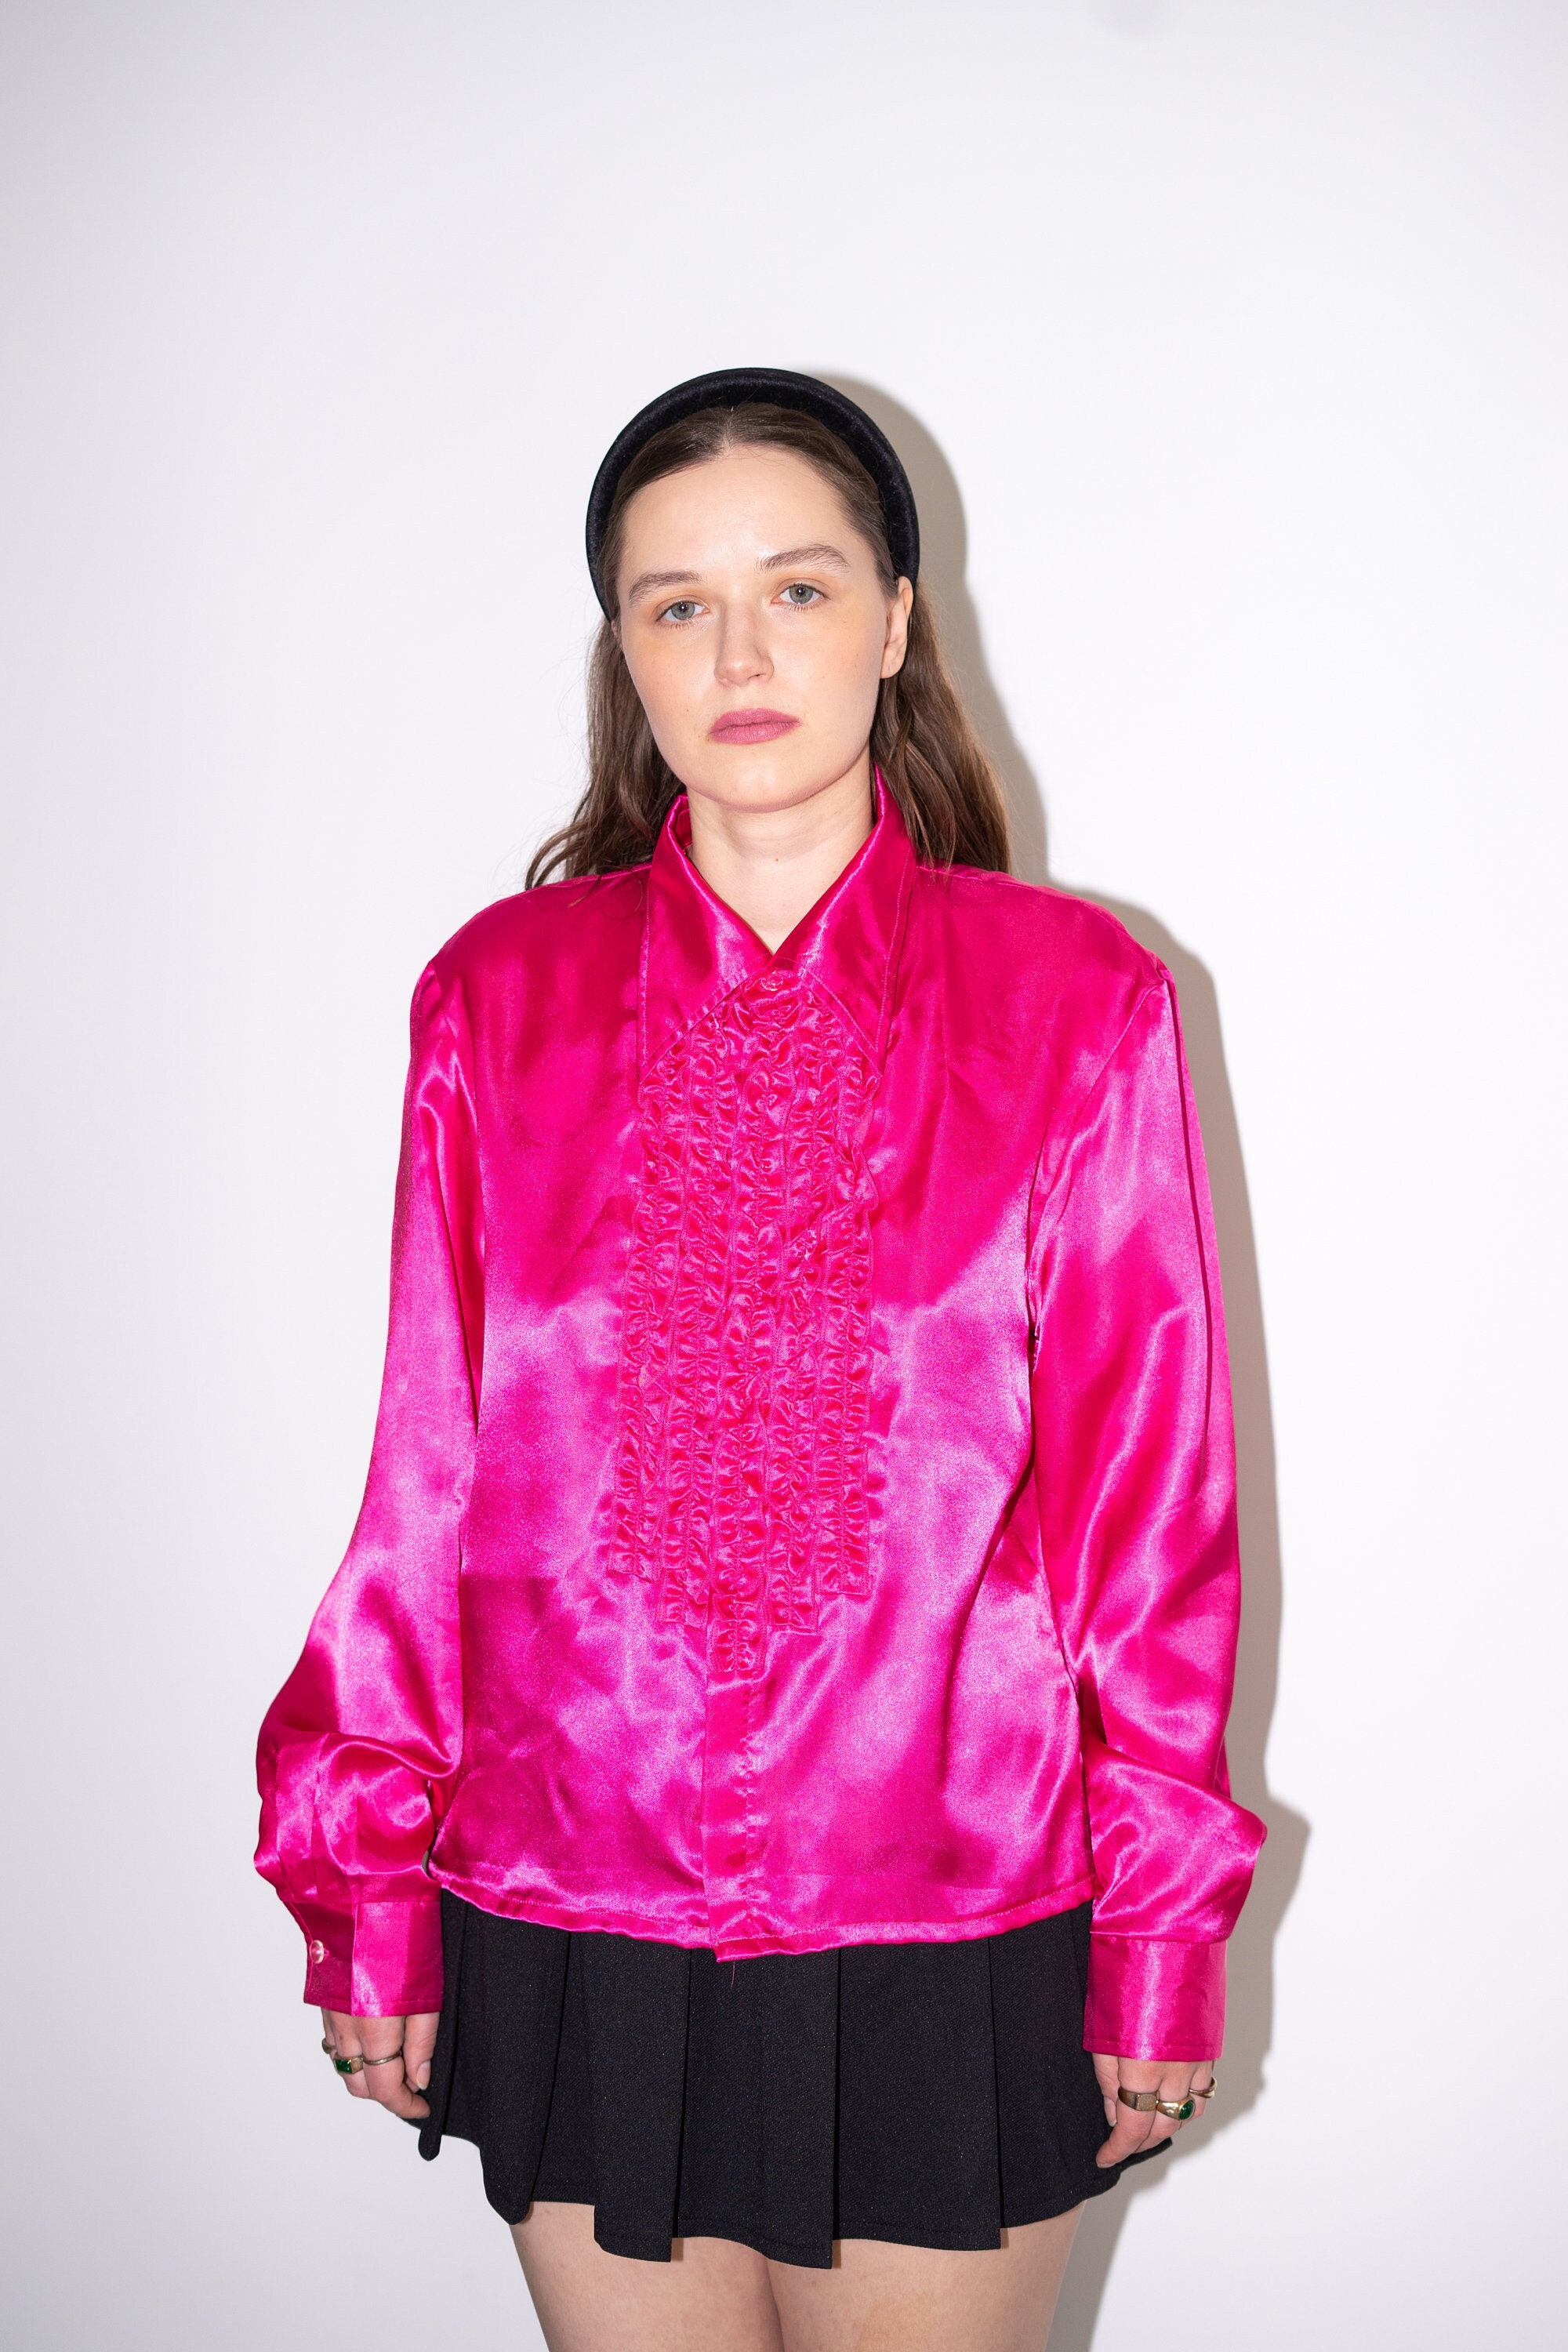 LIMITED COLLECTION Plus Size Hot Pink Satin Shirt